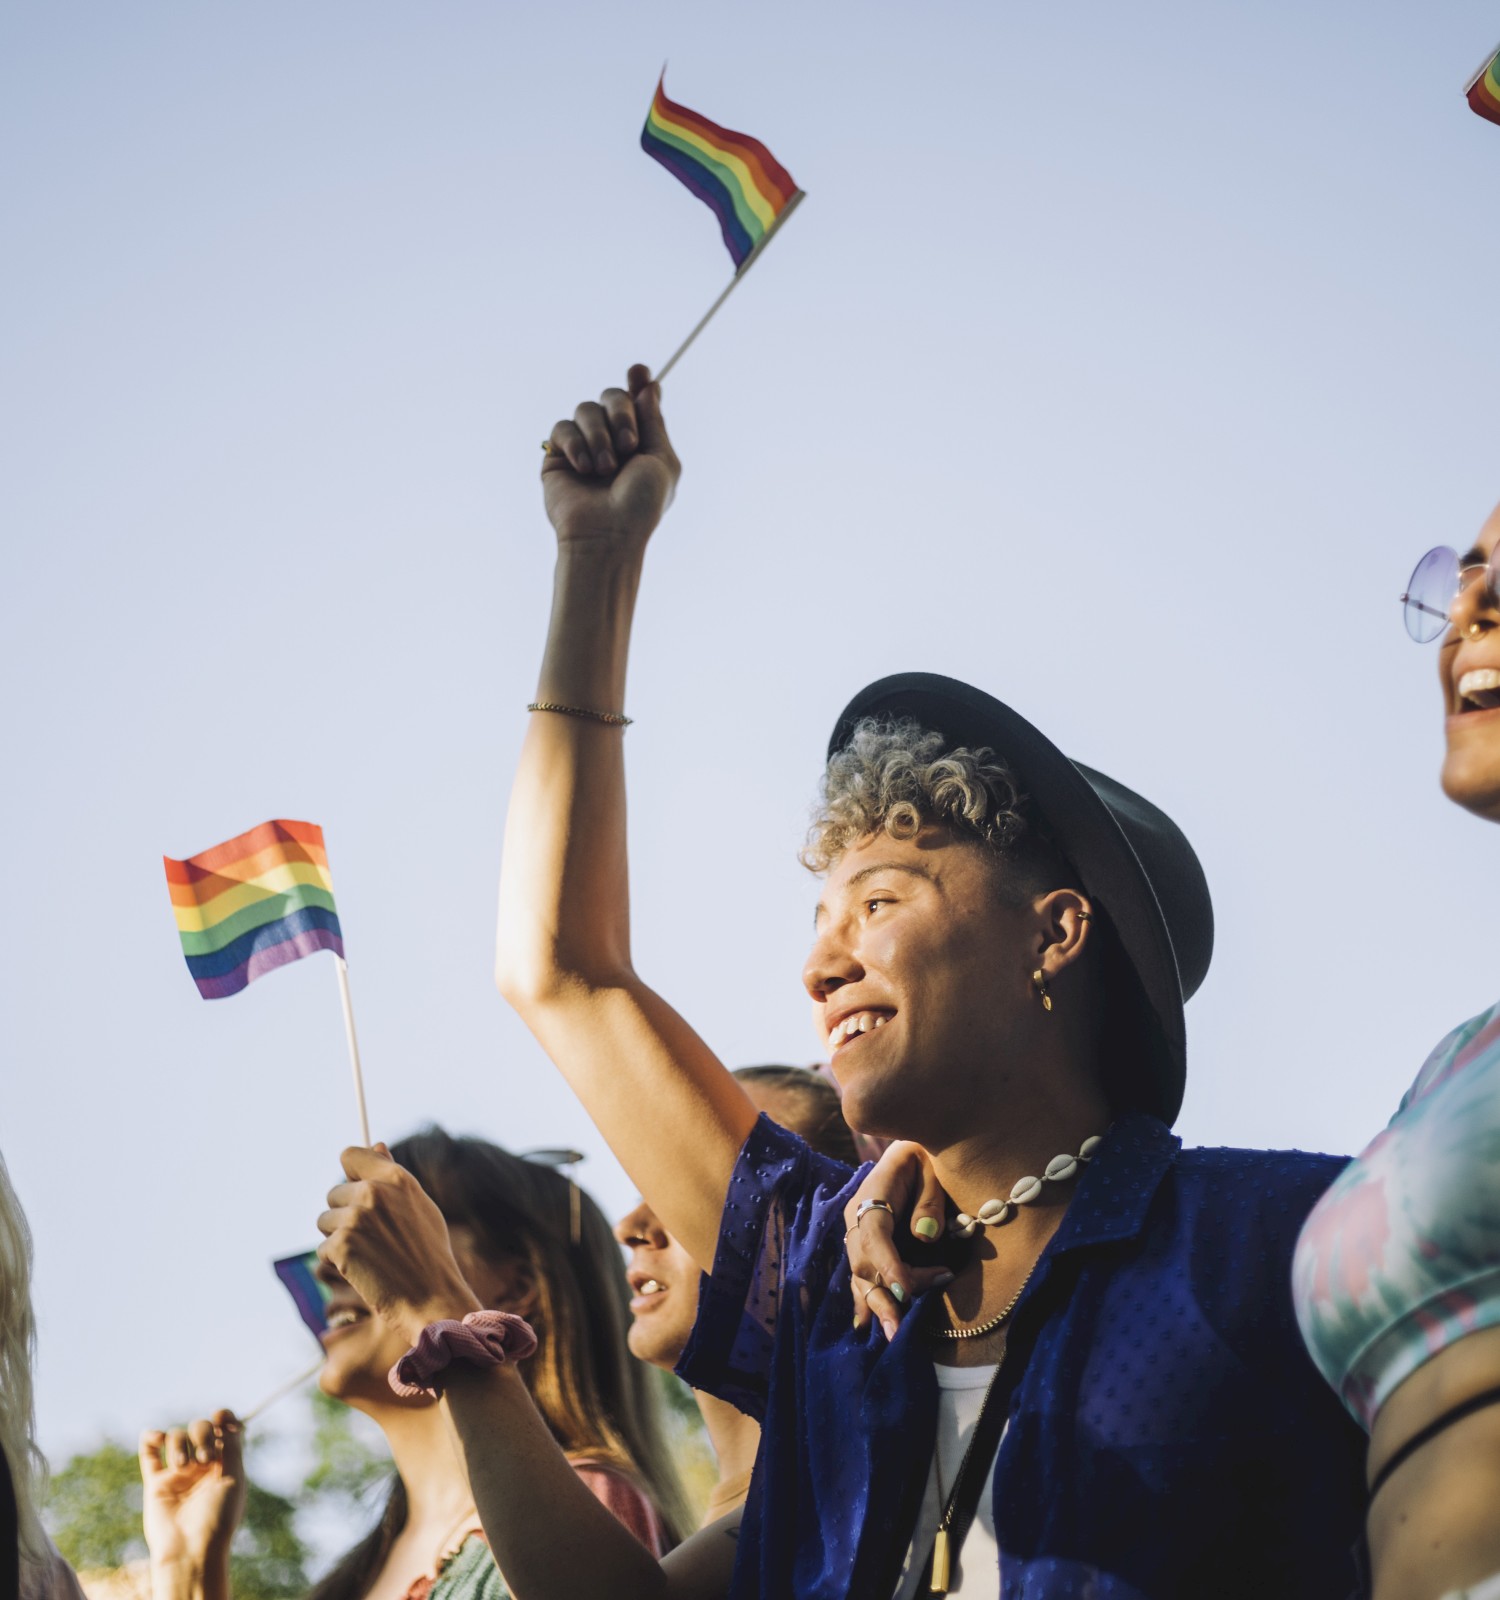 A group of people is celebrating outdoors, joyfully waving rainbow flags while smiling and cheering in support of LGBTQ+ pride.